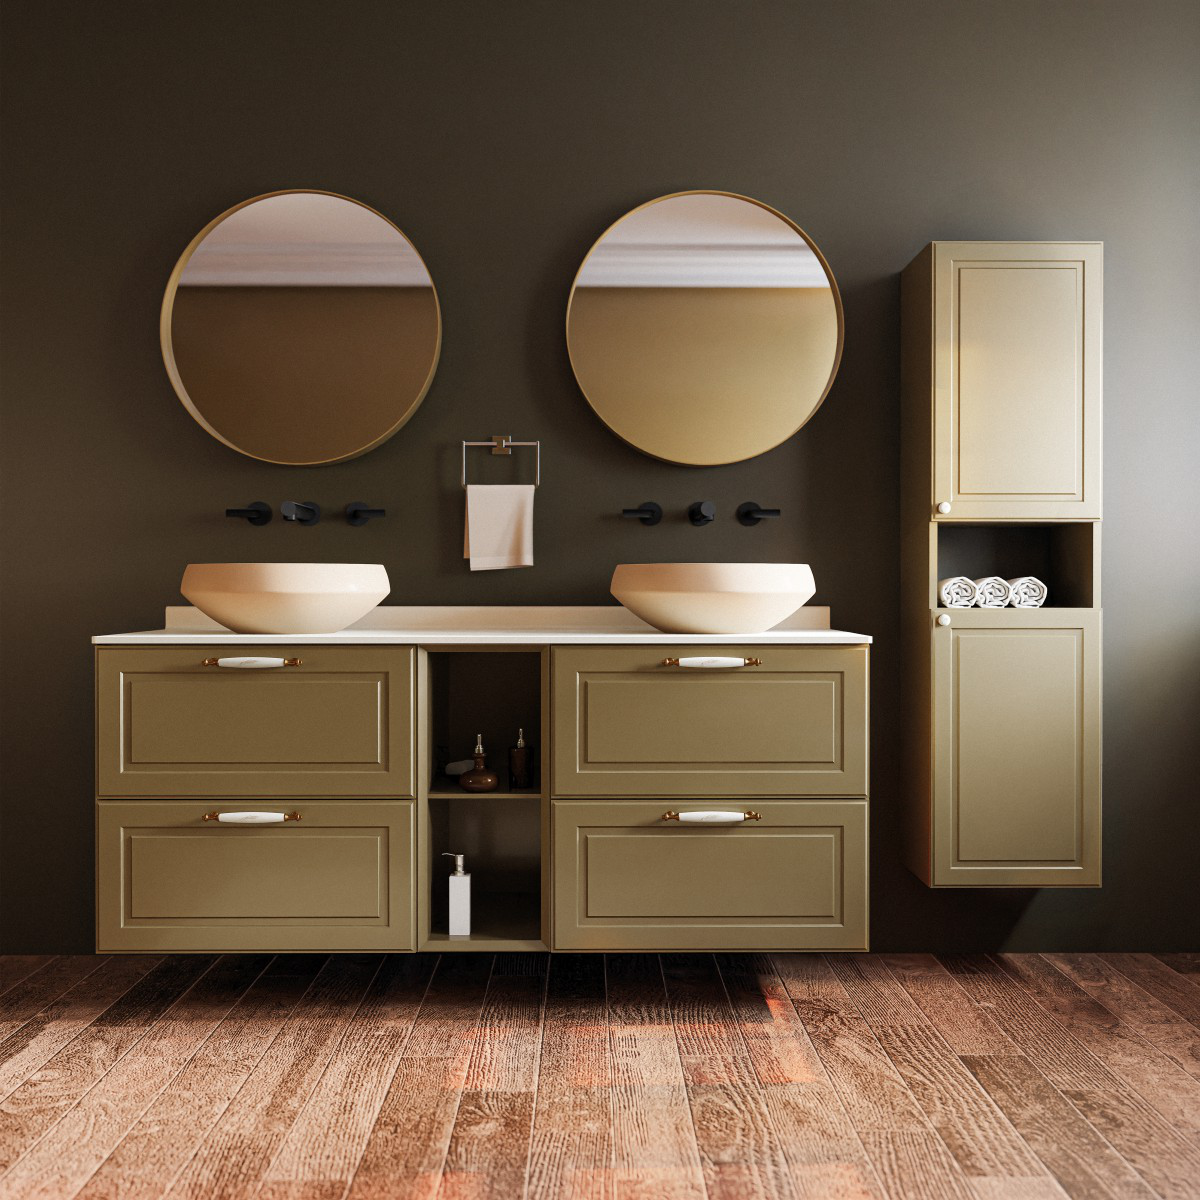 Perra Bathroom Furniture Collection by Creavit